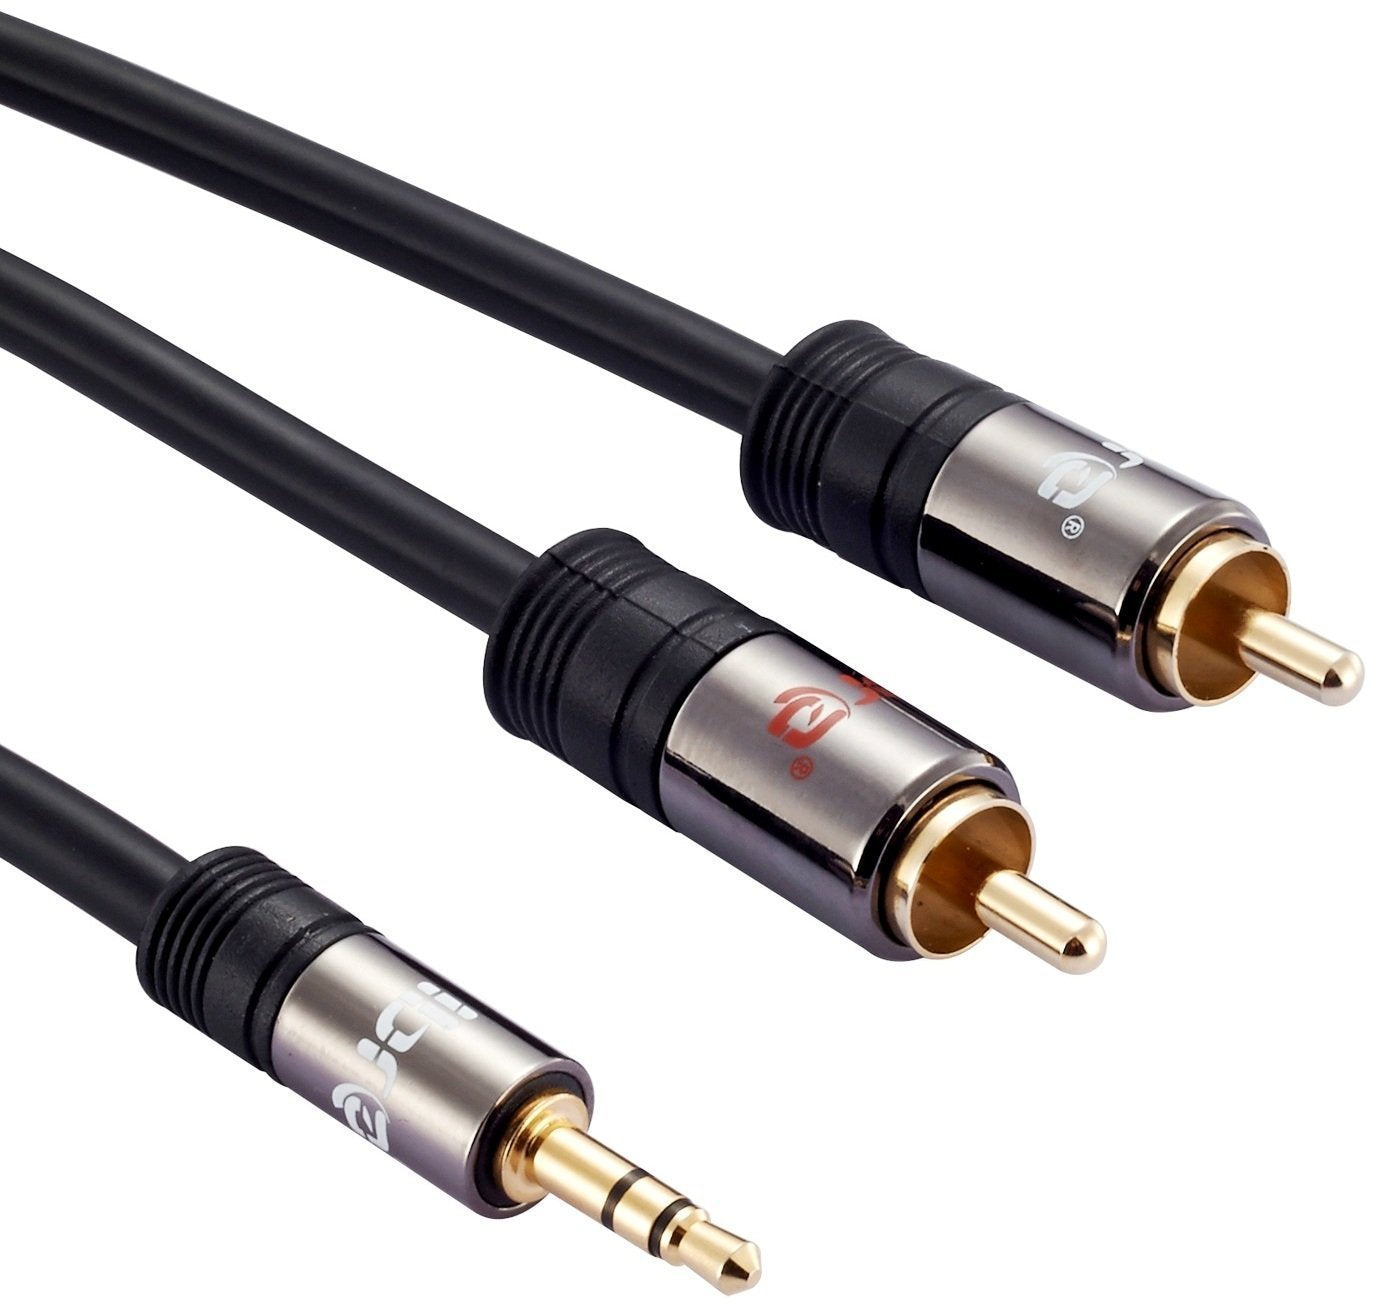 Premium 3.5mm Stereo Jack to 2 RCA Phono Plugs Audio Cable Lead GOLD 2m - IBRA